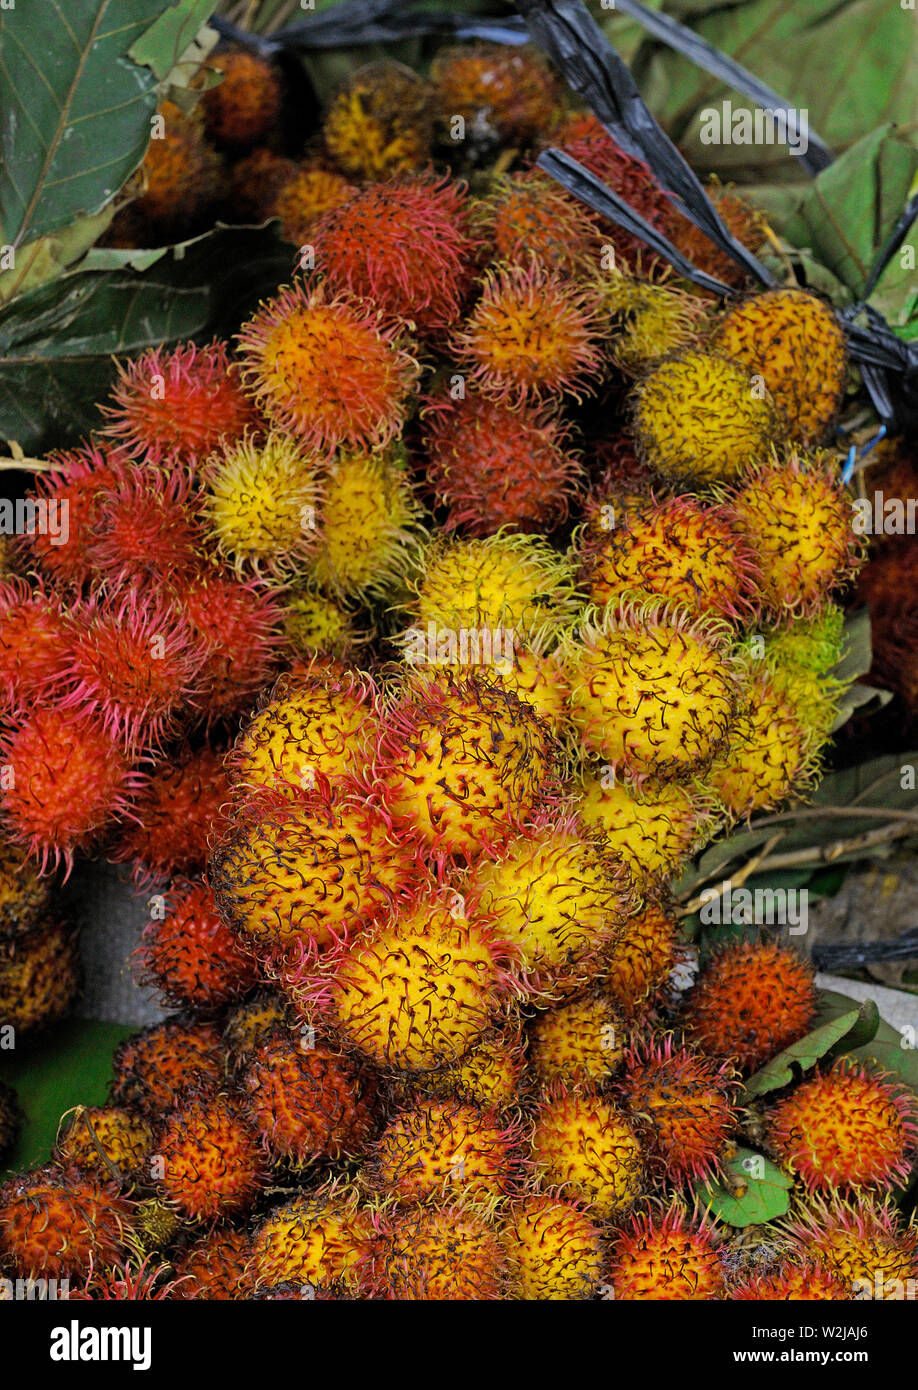 jakarta, dki jakarta/indonesia - december 08, 2008: a bunch of rambutan displayed for sale at a market in tanjung priok Stock Photo